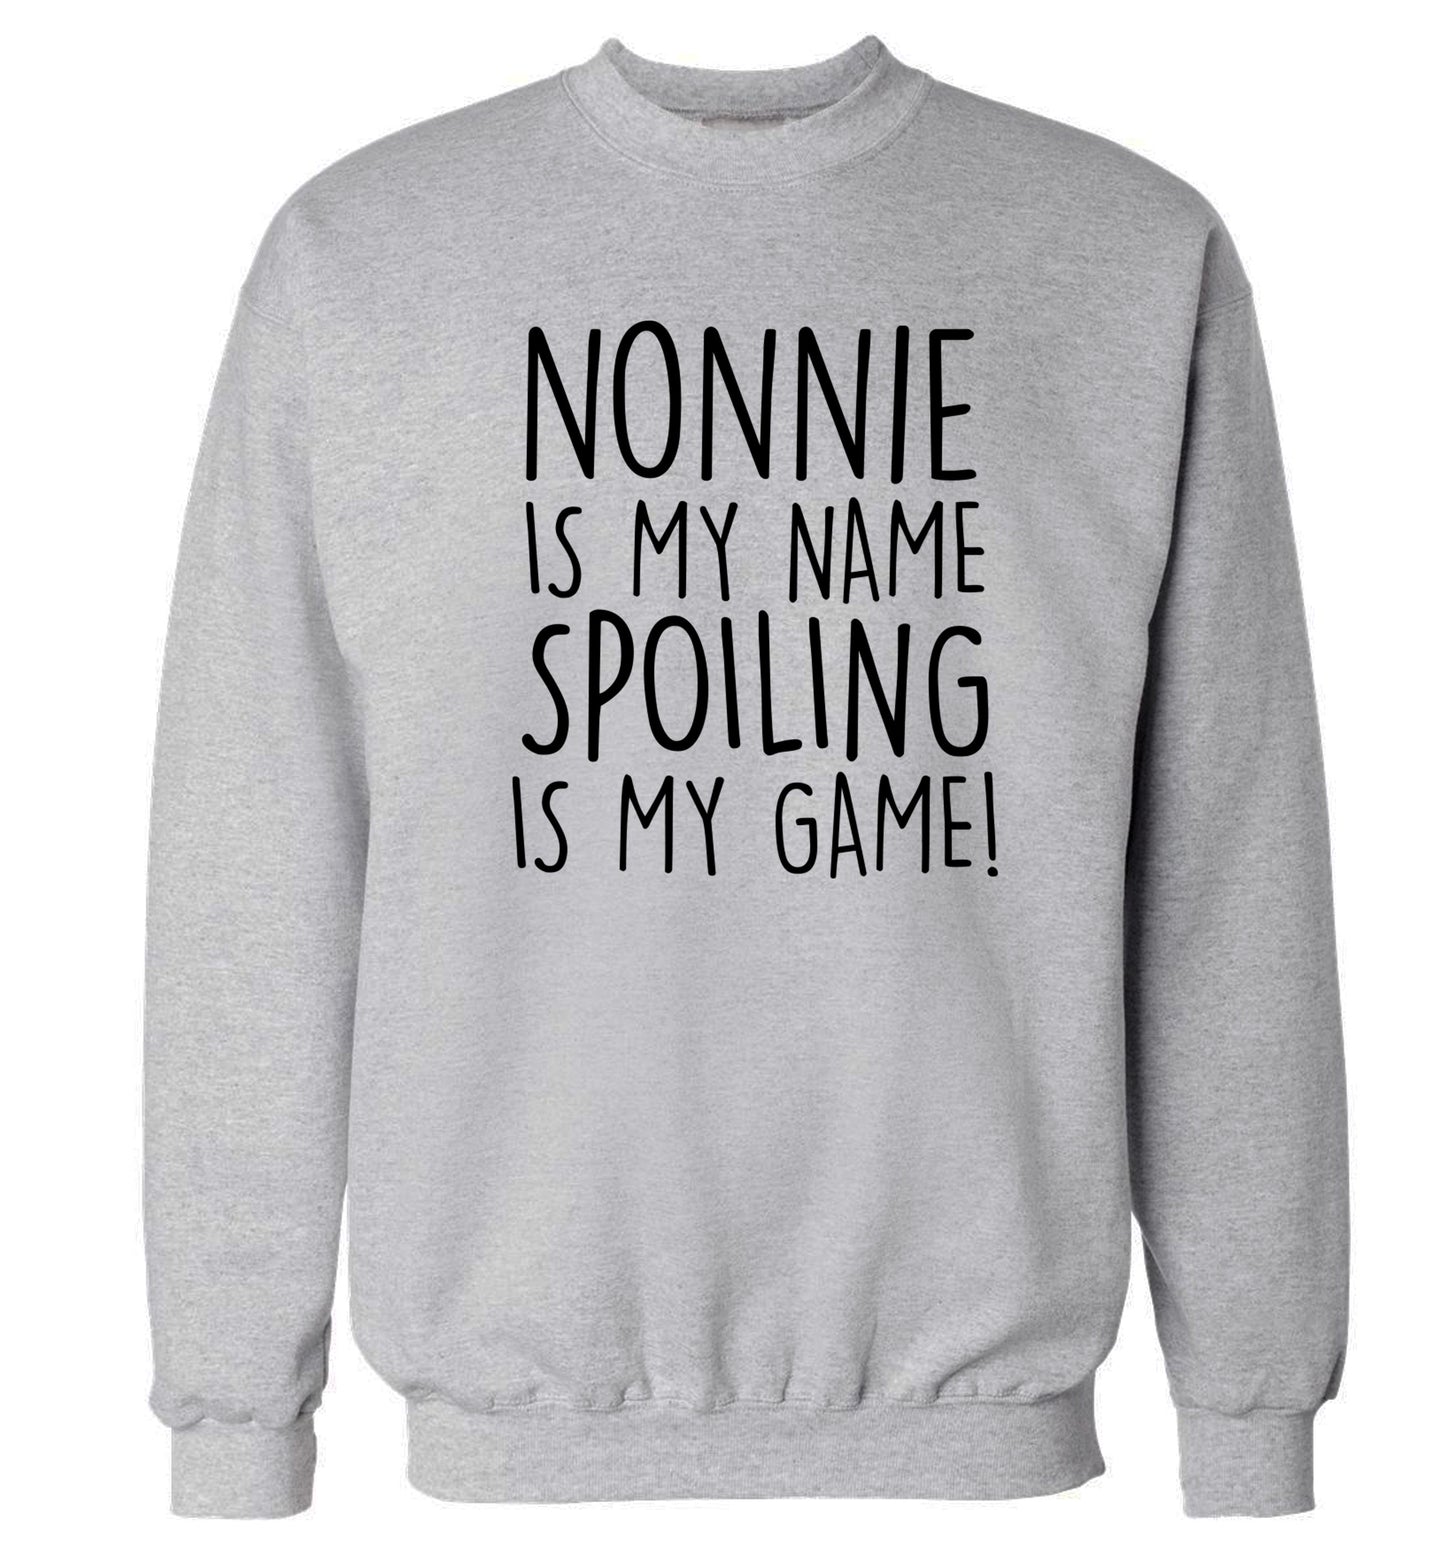 Nonnie is my name, spoiling is my game Adult's unisex grey Sweater 2XL